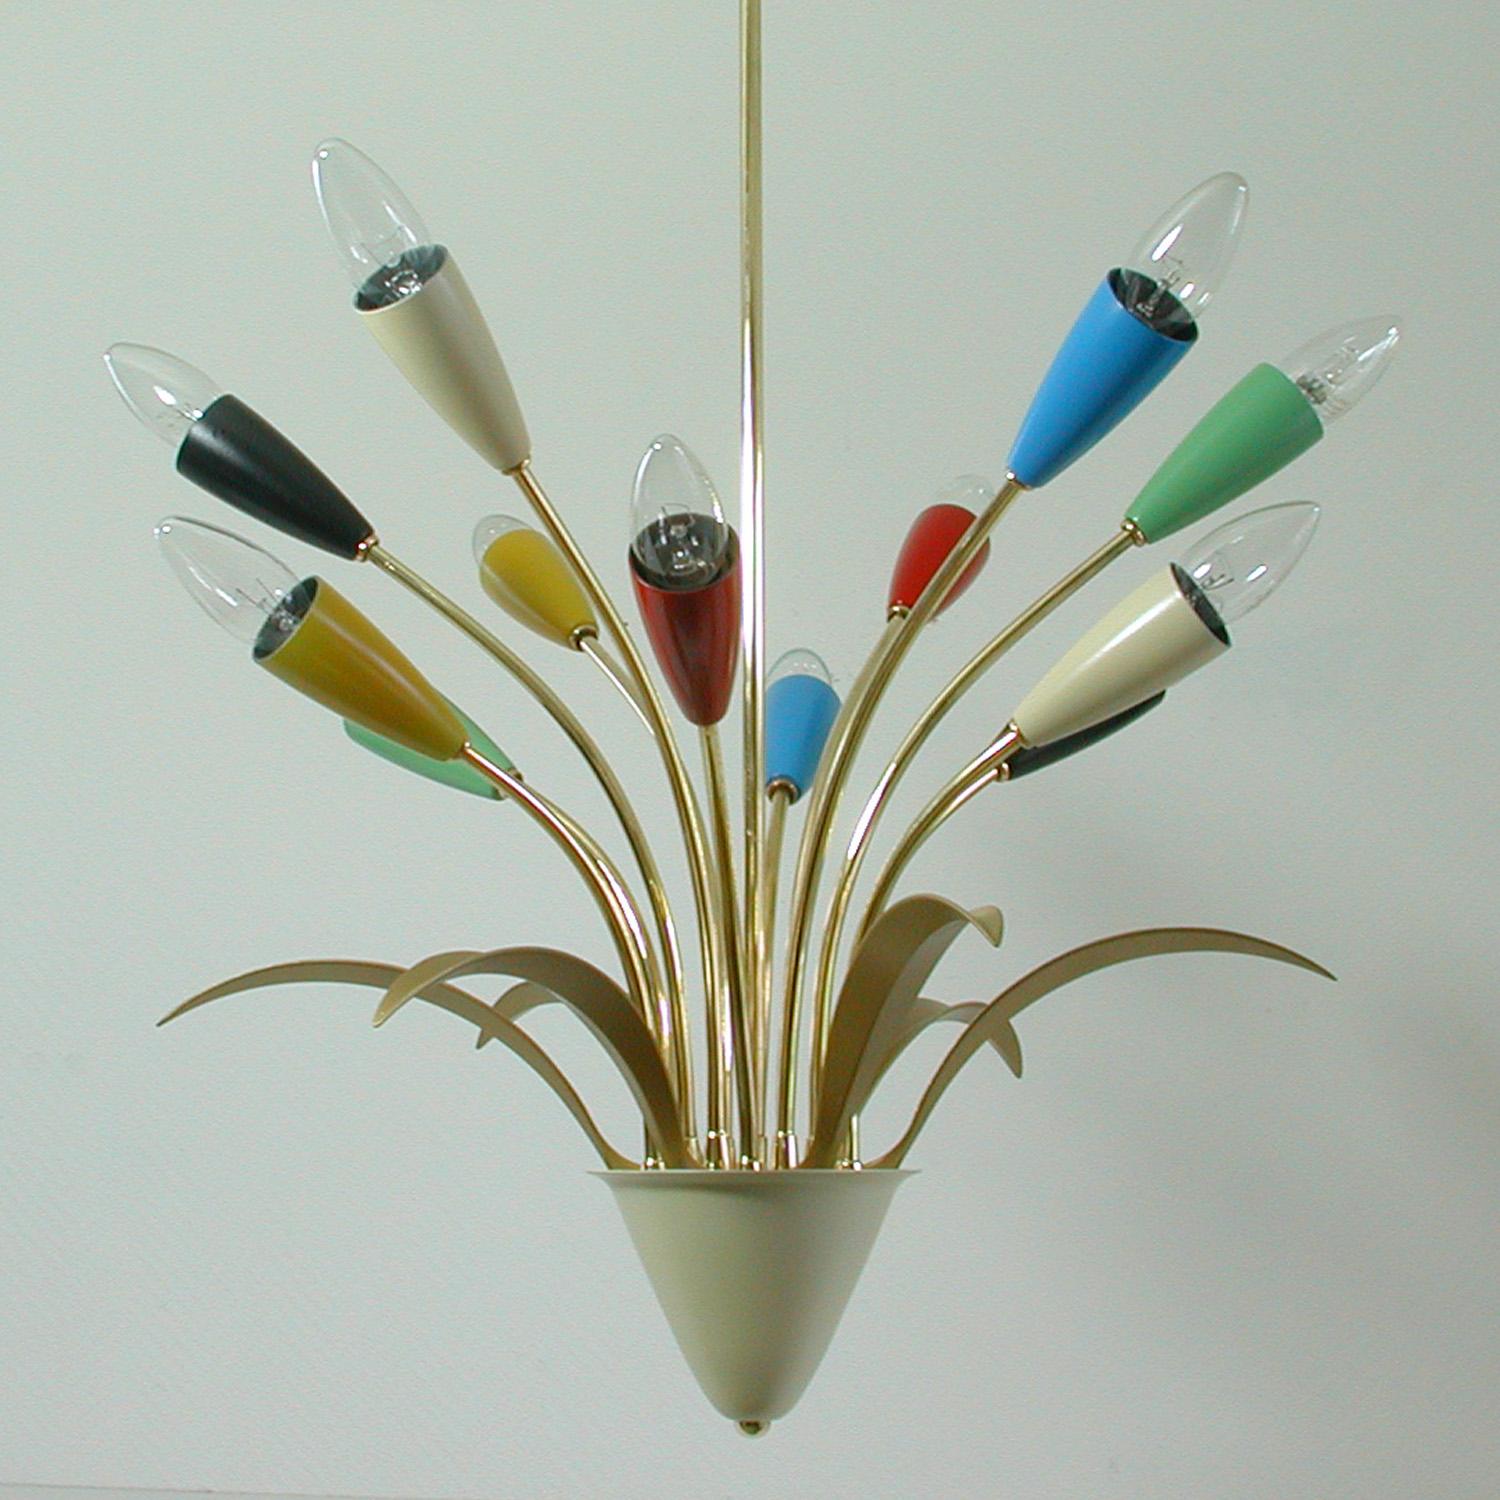 This multi-color Sputnik chandelier was made in Italy in the 1950s and is attributed to Arredoluce, Monza. 

It has got 12 bakelite bulb holders which request an E14 bulb each. The bulb holders have got the color cream, red, blue, light green and